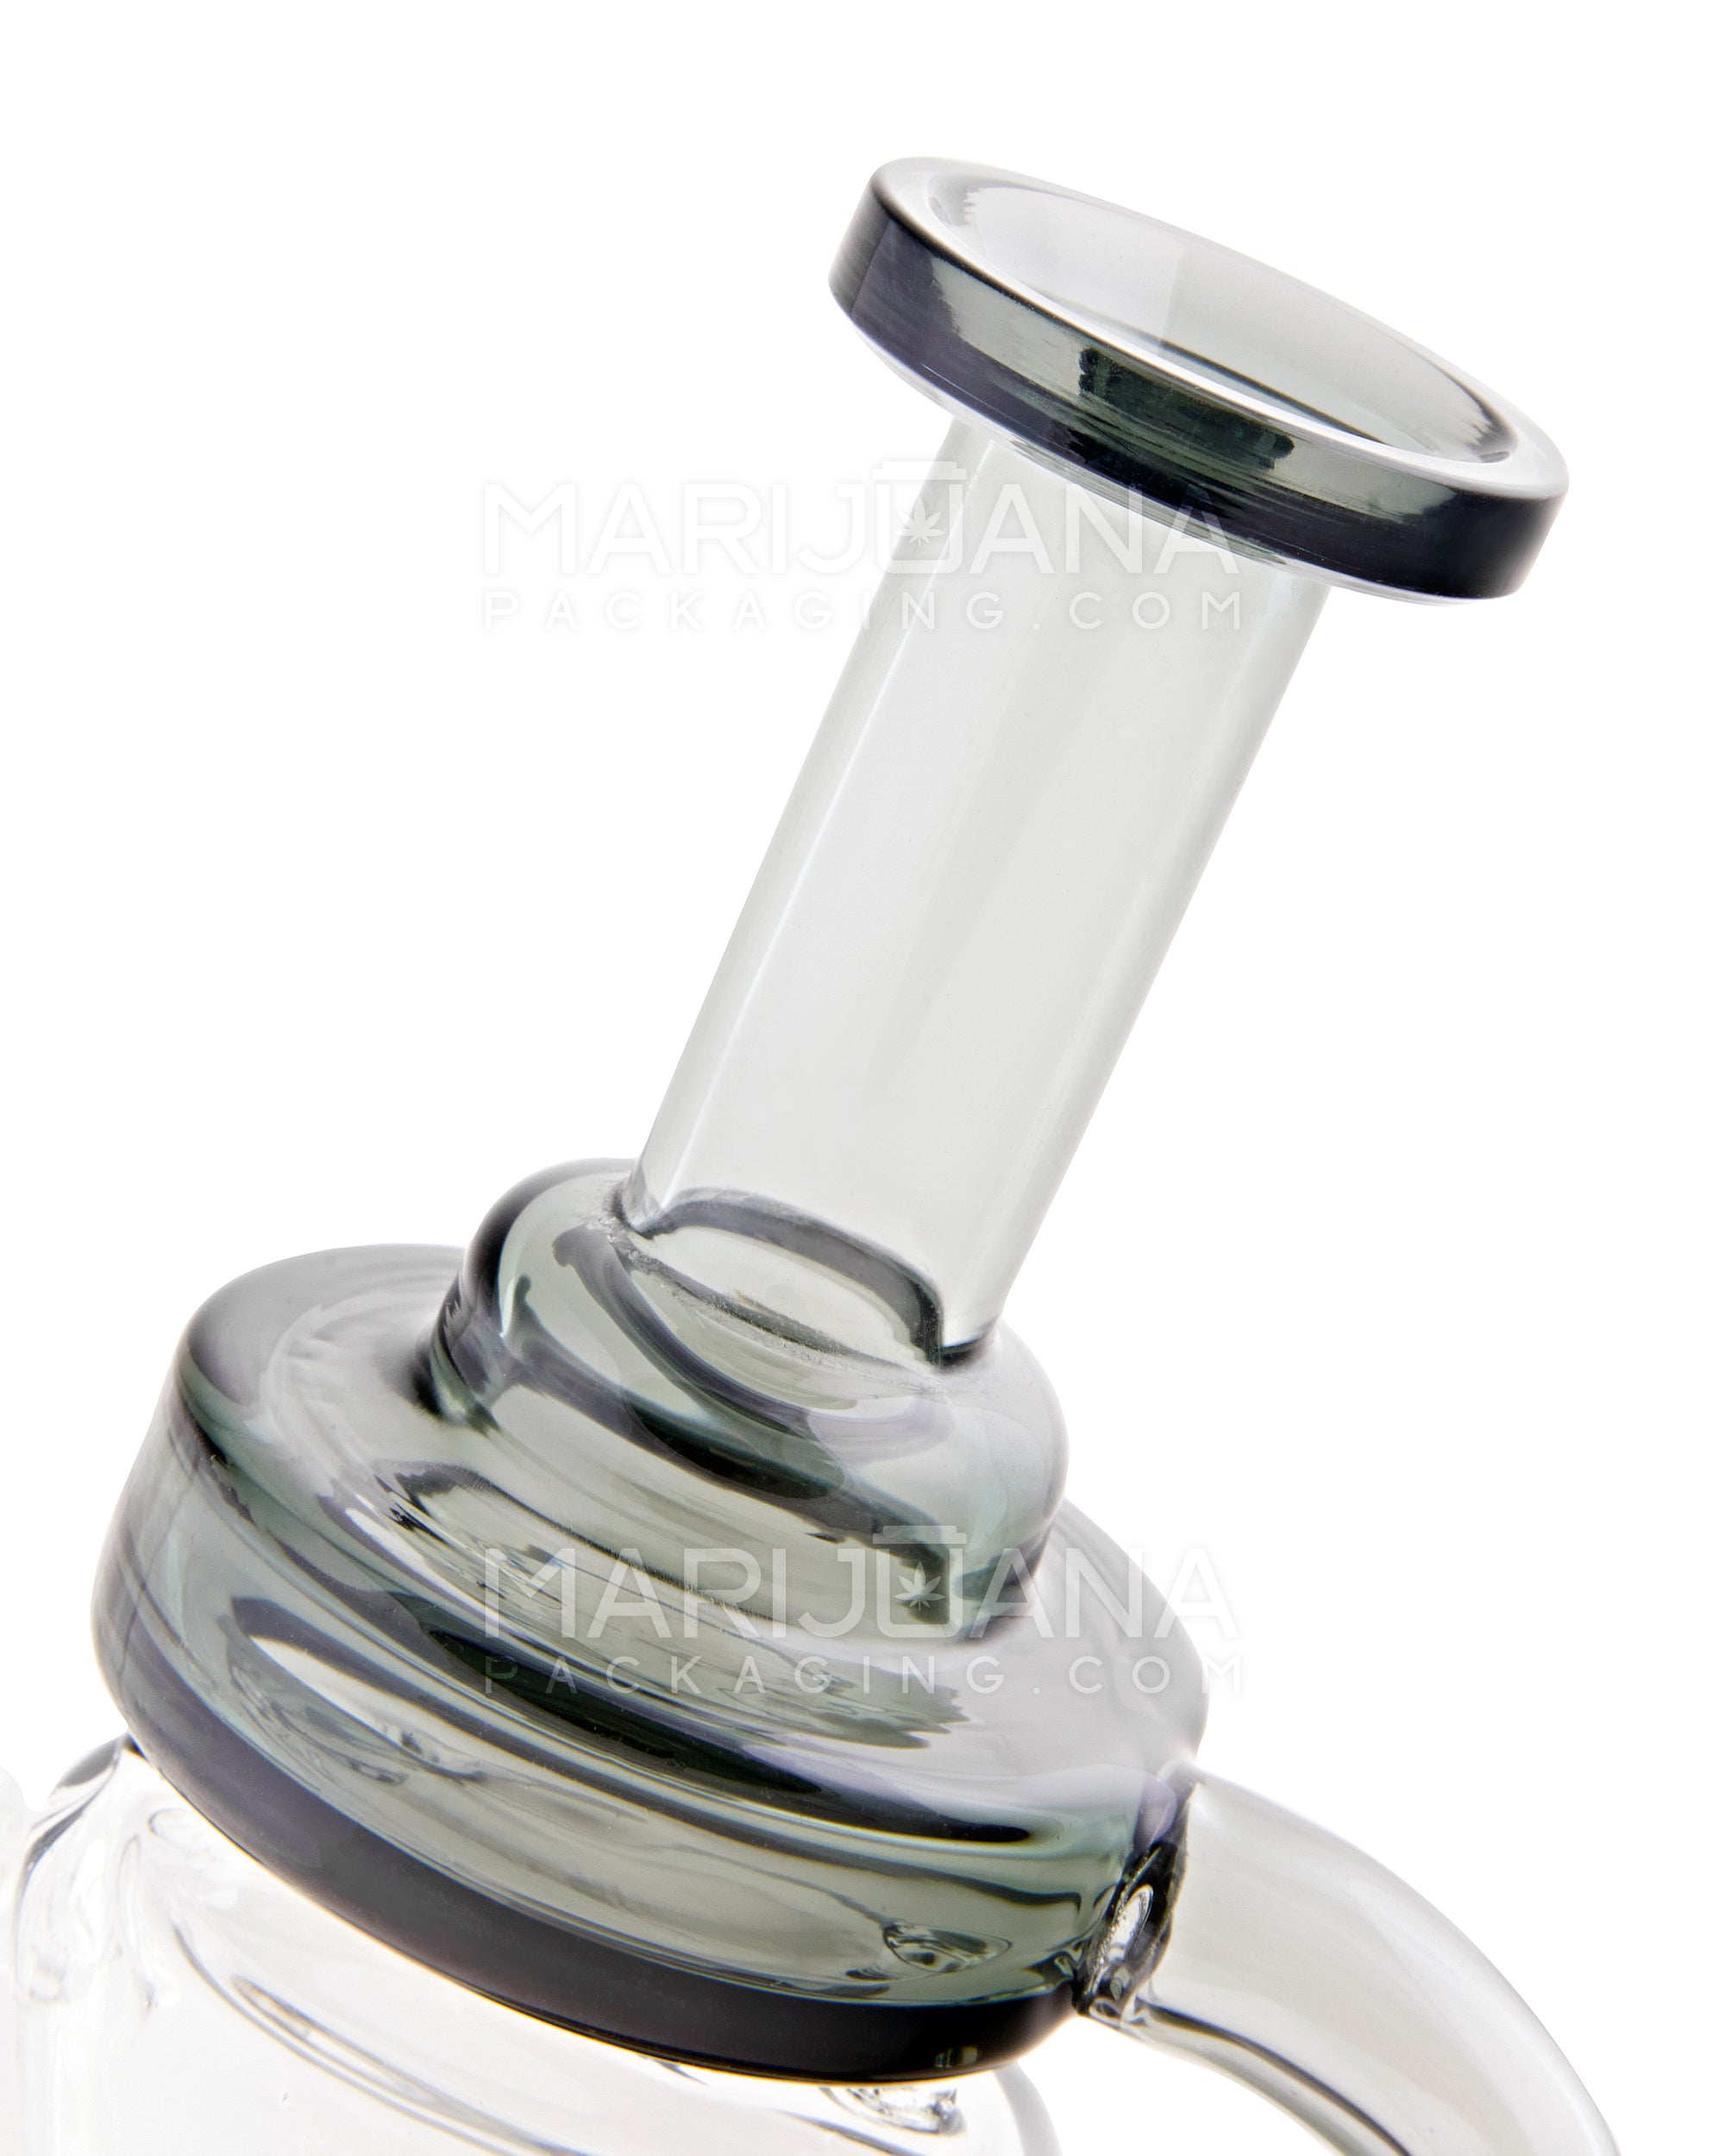 USA Glass | Bent Neck Laidback Recycler Water Pipe w/ Donut Showerhead Percolator | 7in Tall - 14mm Bowl - Smoke